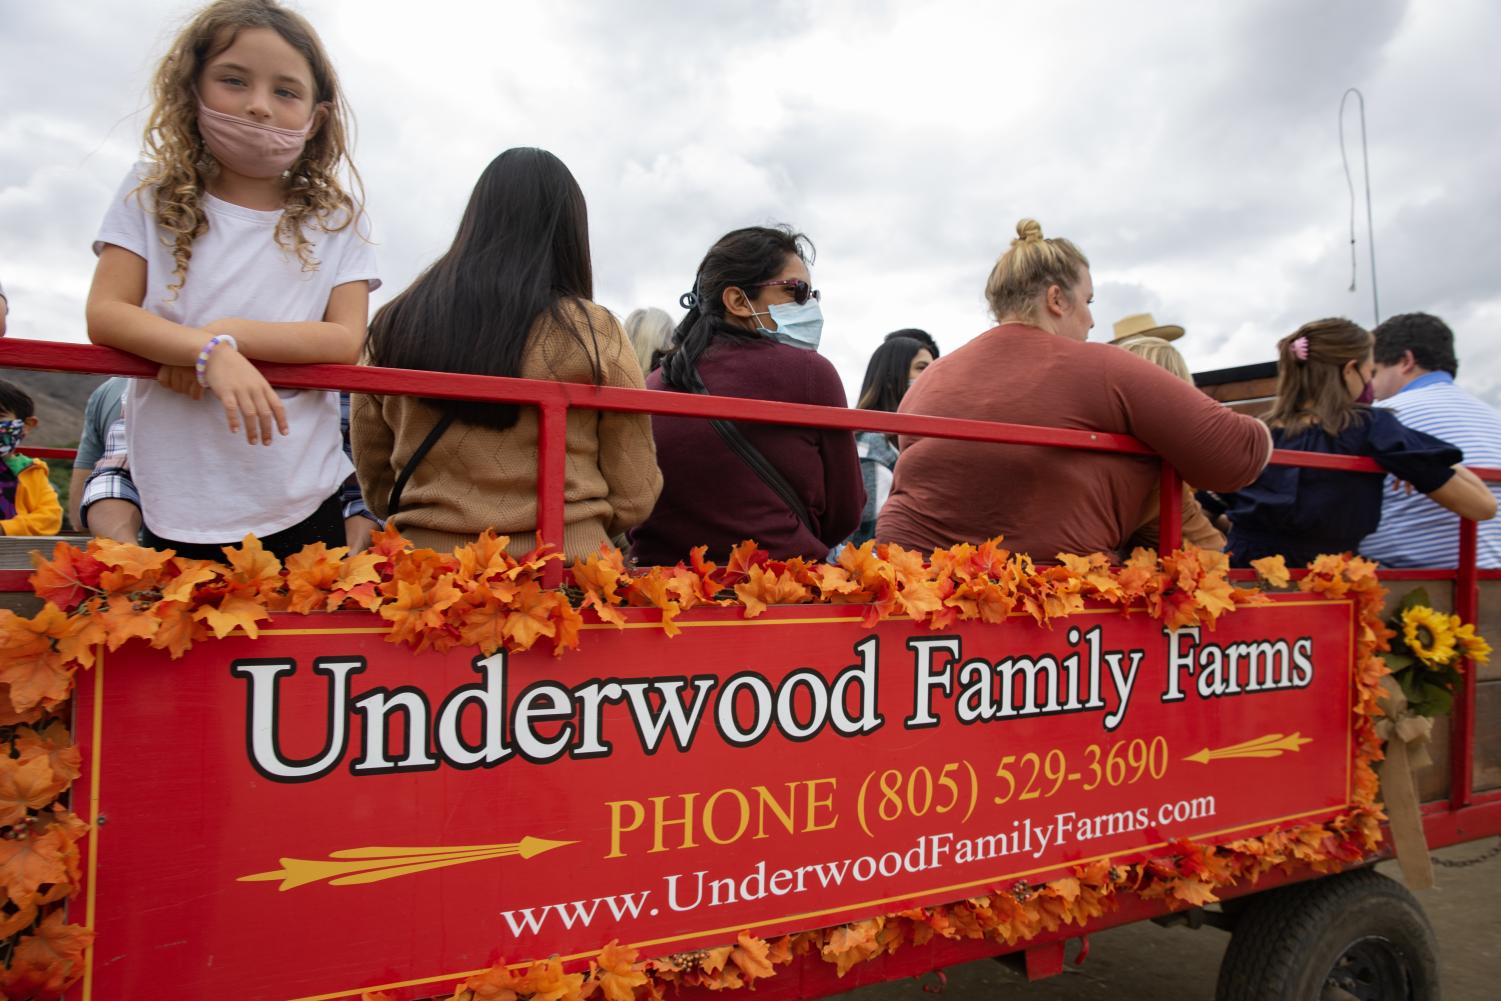 Underwood+Family+Farms+annual+Fall+Harvest+on+the+Farm+slowly+made+a+return+to+a+more+normal+experience+this+year%2C+with+many+activities+for+family+and+friends+to+enjoy+during+the+season.